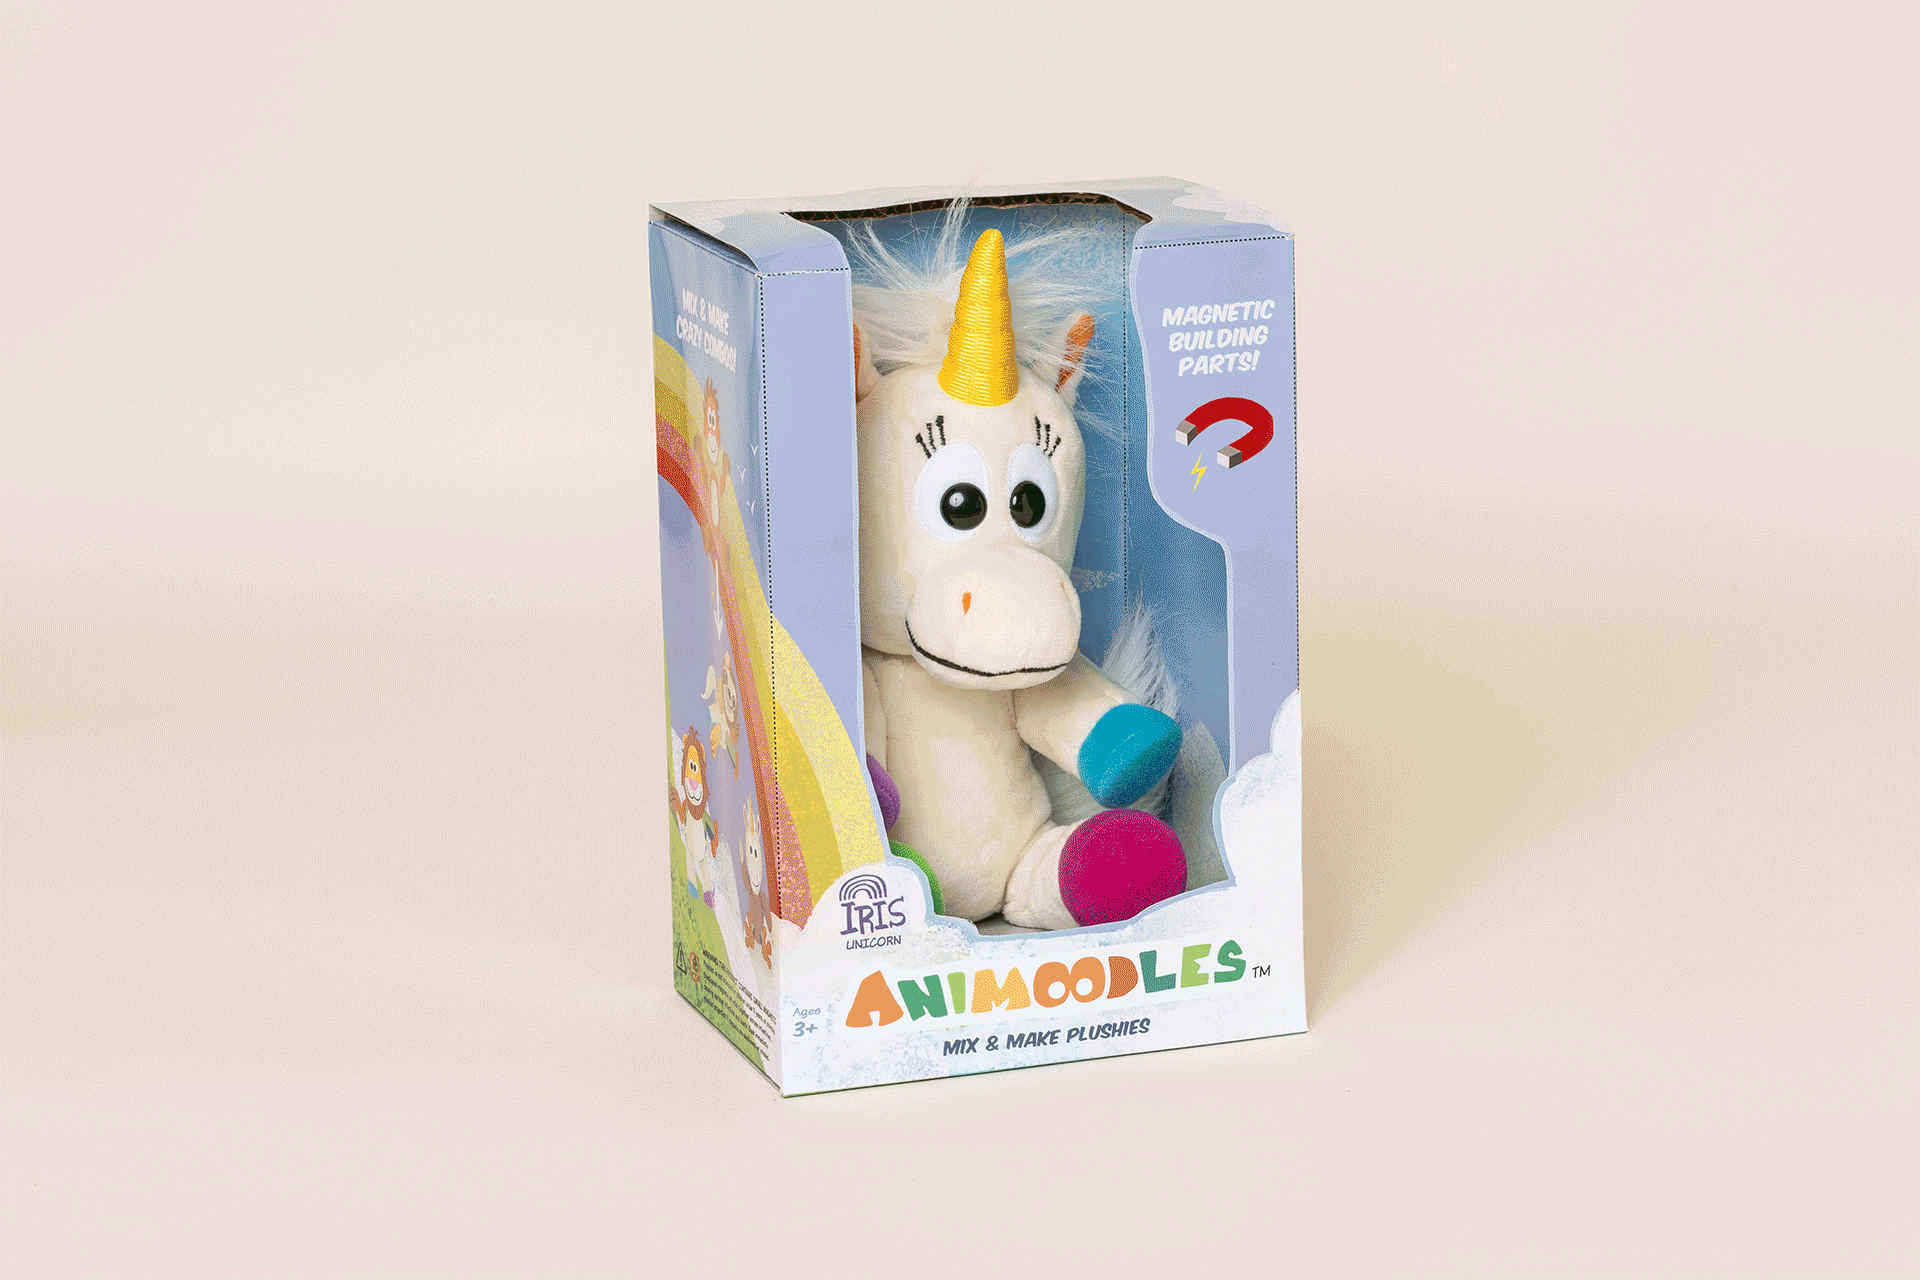 A fully designed package for the Animoodles. 